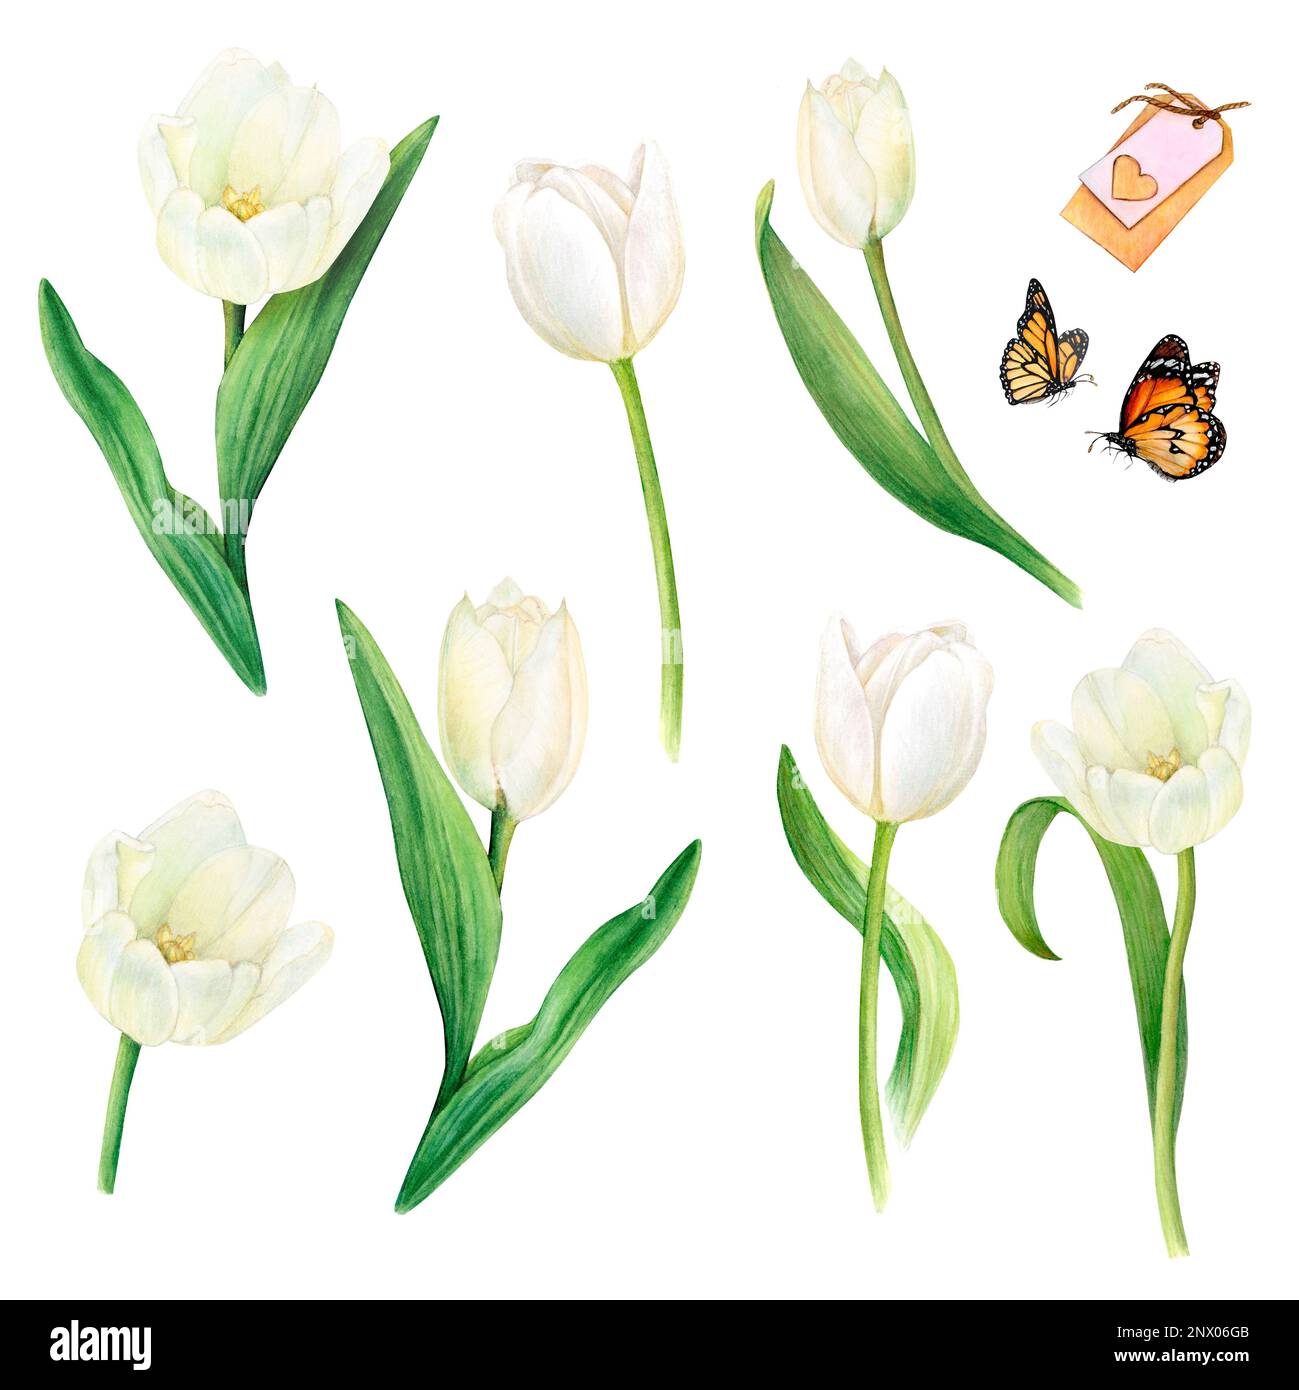 Watercolour painting of white tulips with leaves isolated, butterflies, a name card on a white background. Botanical drawing by hand.  Stock Photo